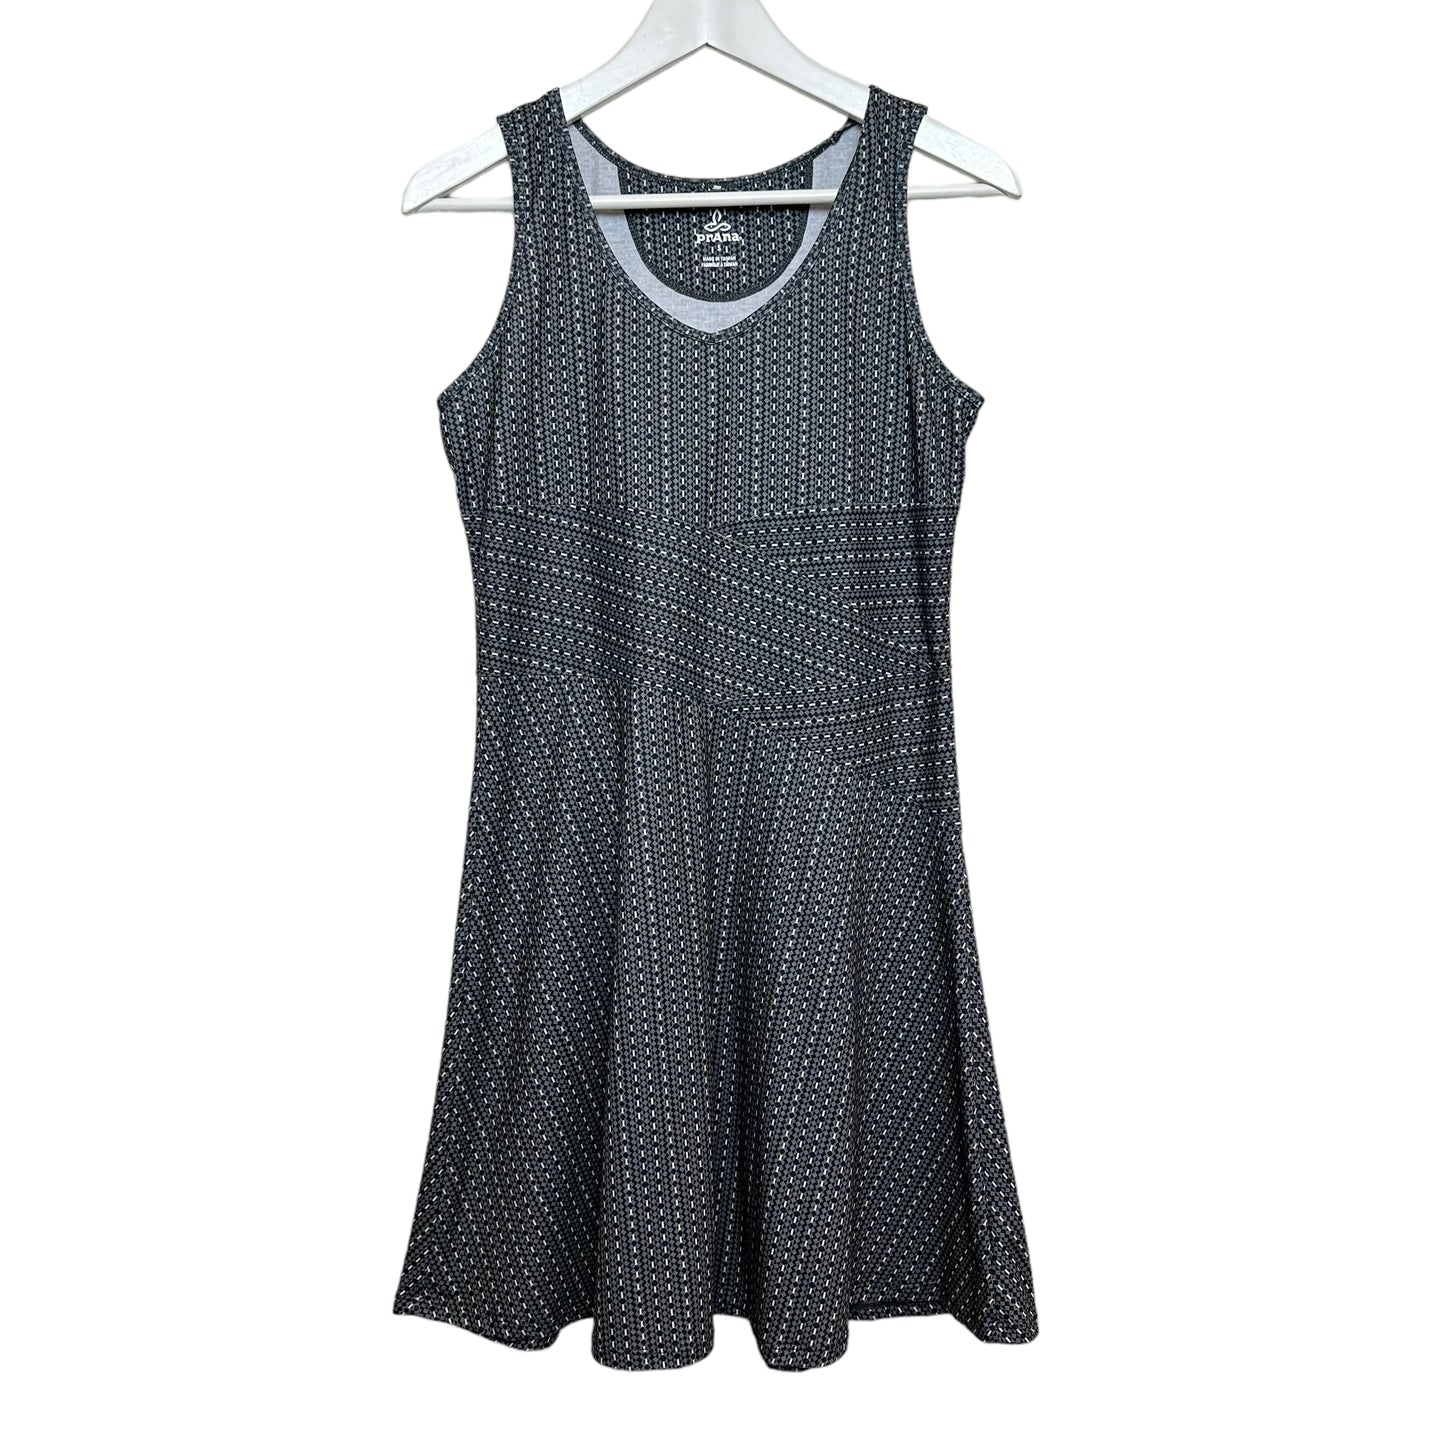 Prana Amelie Dress Charcoal Parade Athletic Active Dress Small